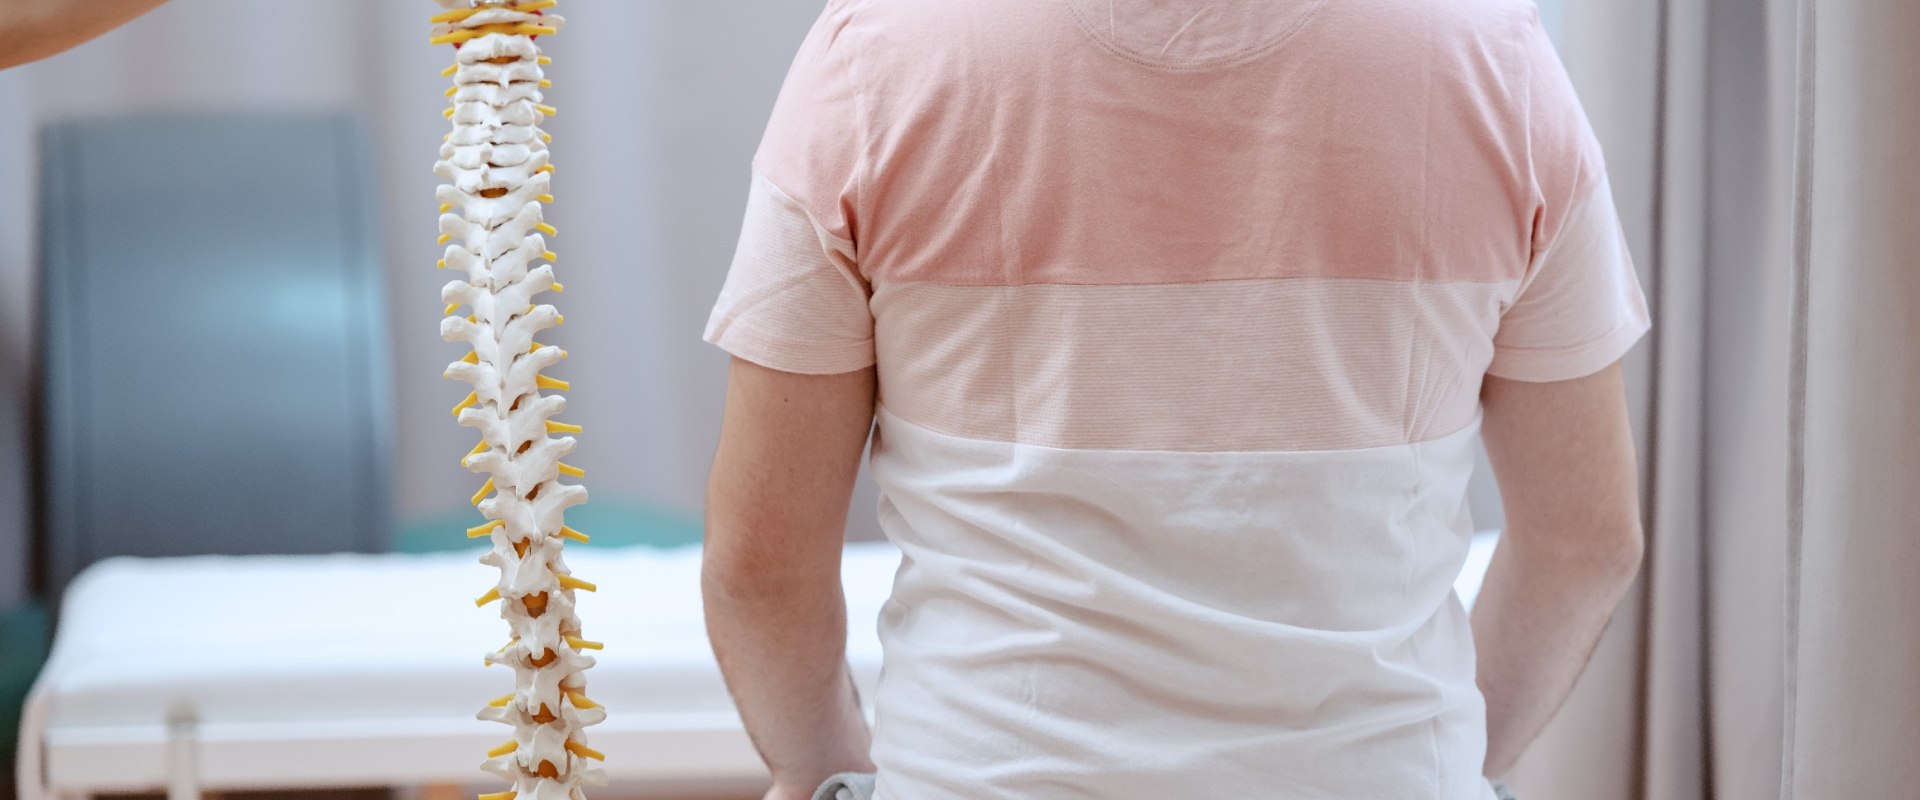 How Long Does It Take for a Chiropractic Adjustment to Settle?